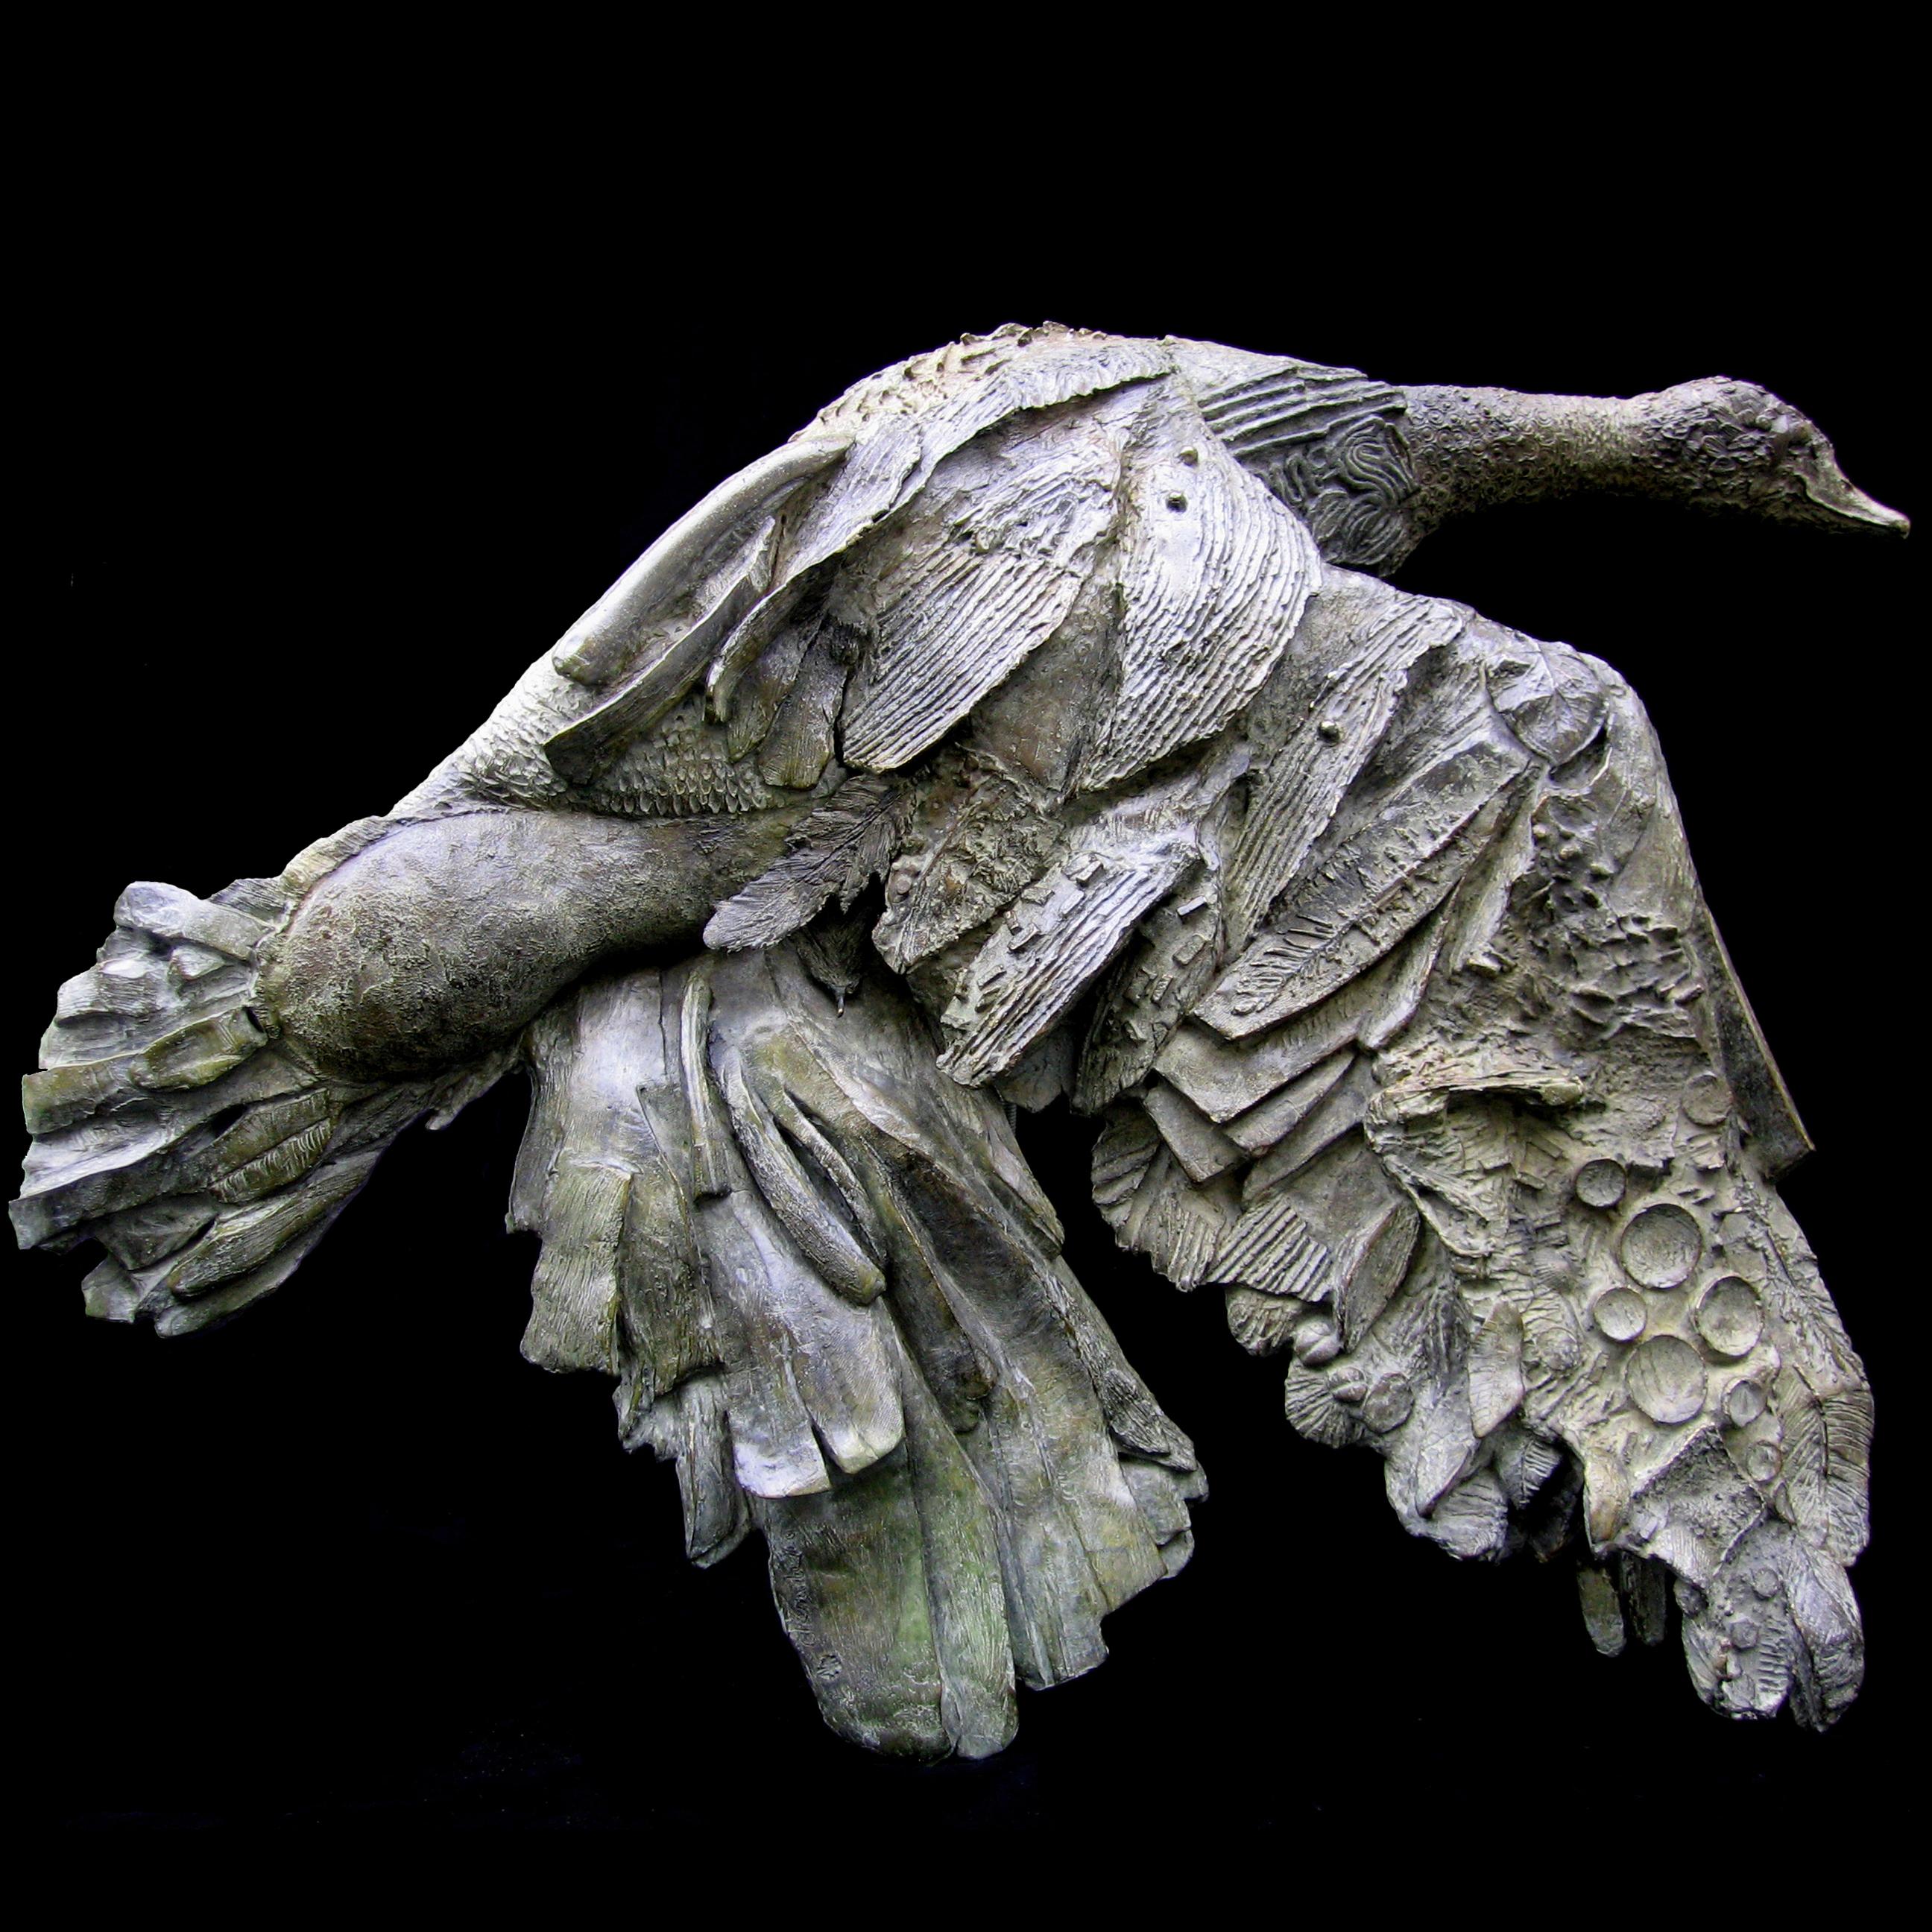 Envol is a unique bronze sculpture by contemporary artist Chésade, dimensions are 58 × 65 × 9 cm (22.8 × 25.6 × 3.5 in). The sculpture is signed and comes with a certificate of authenticity.

You can display this high relief bronze sculpture of a